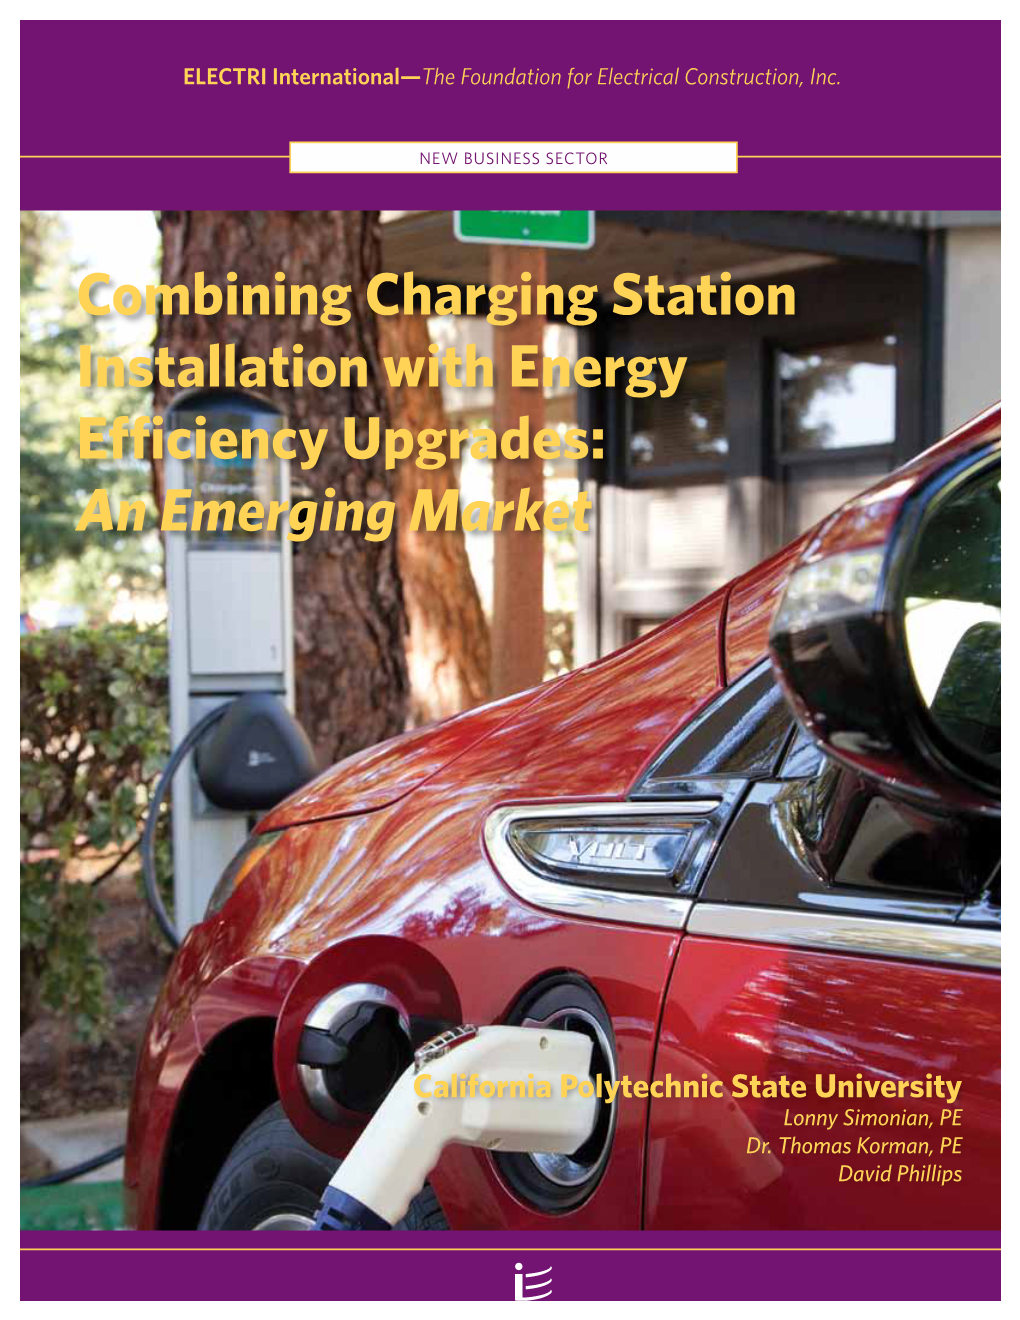 Combining Charging Station Installation with Energy Efficiency Upgrades